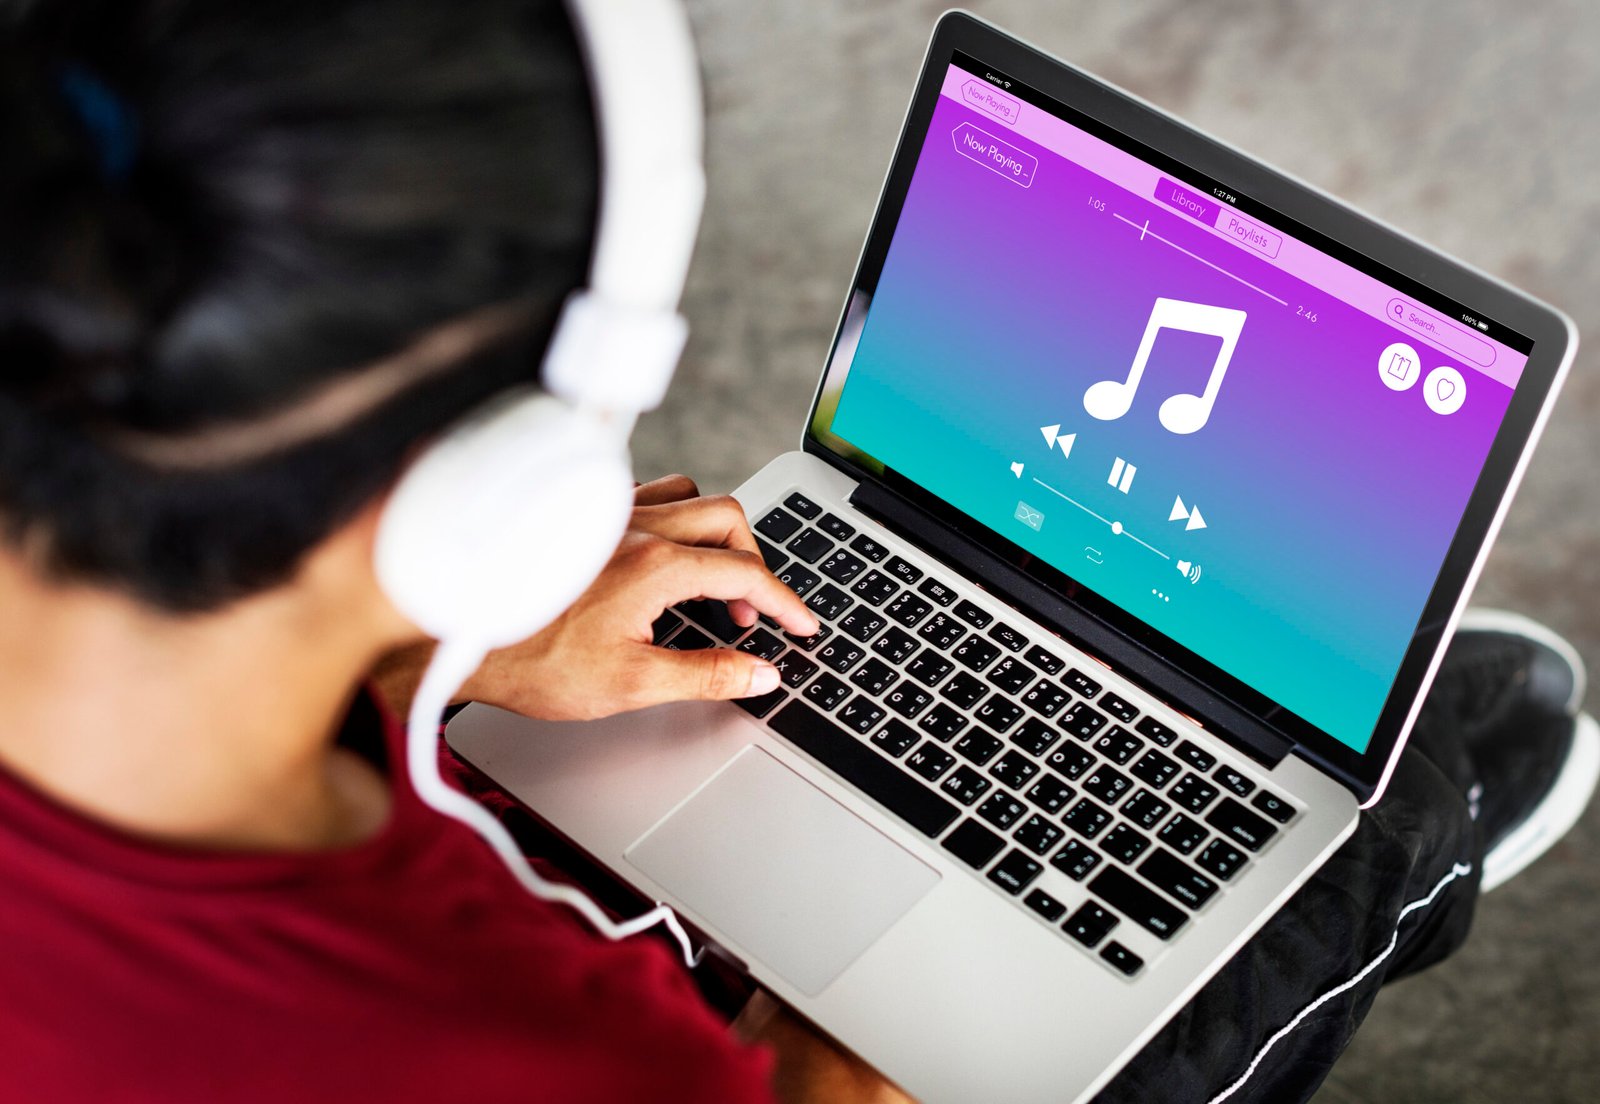 Apple Makes Play for Windows Users with New Apple Music App